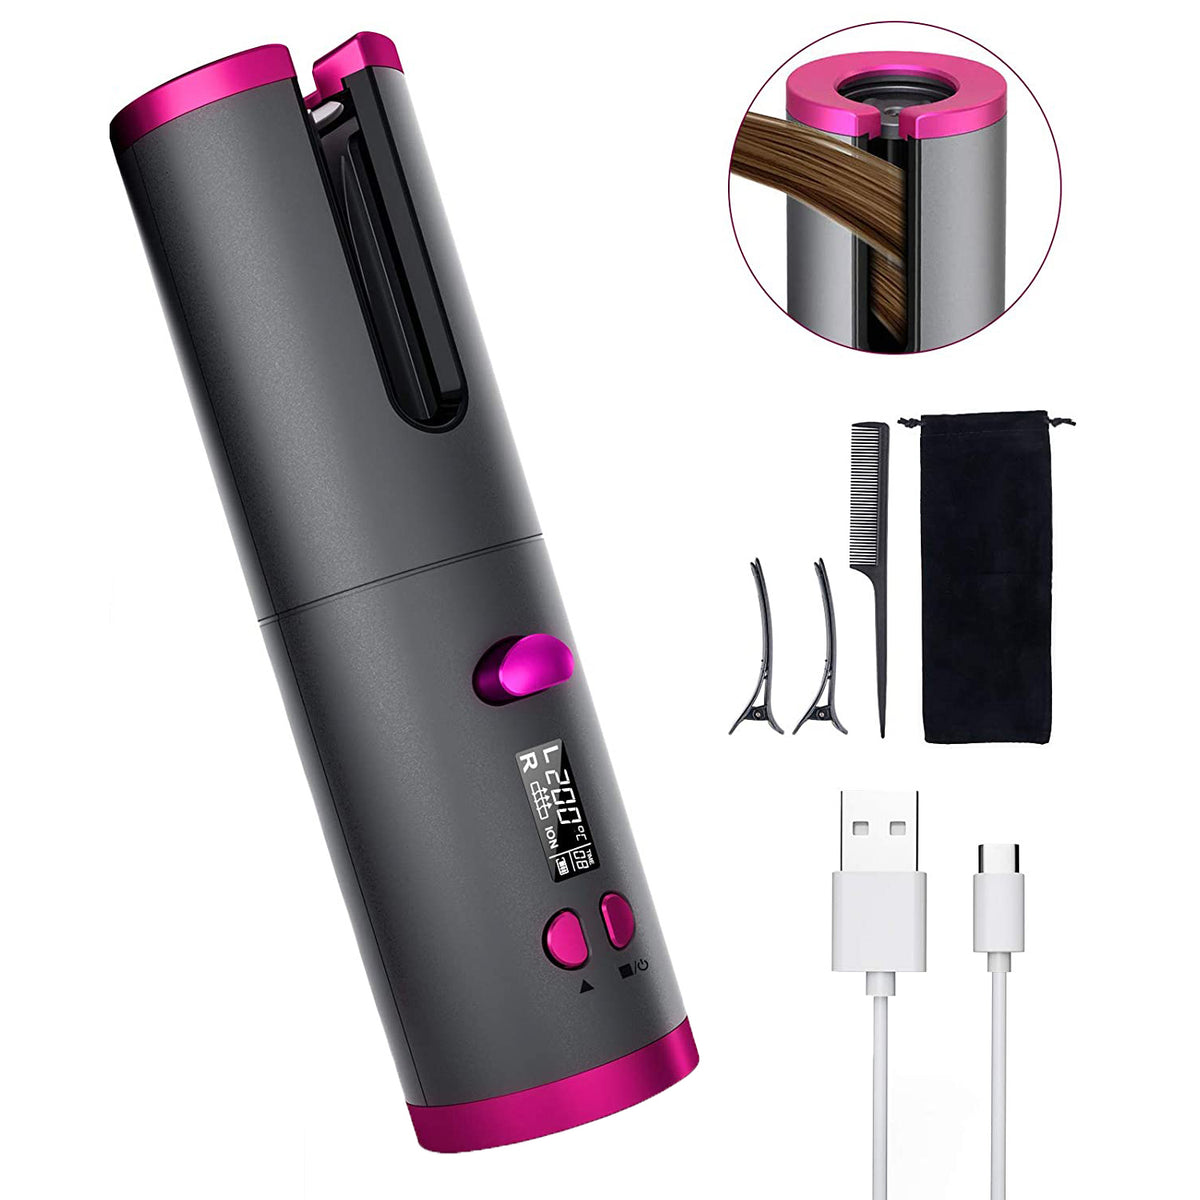 Cordless Ceramic Automatic Hair Curler with accessories.